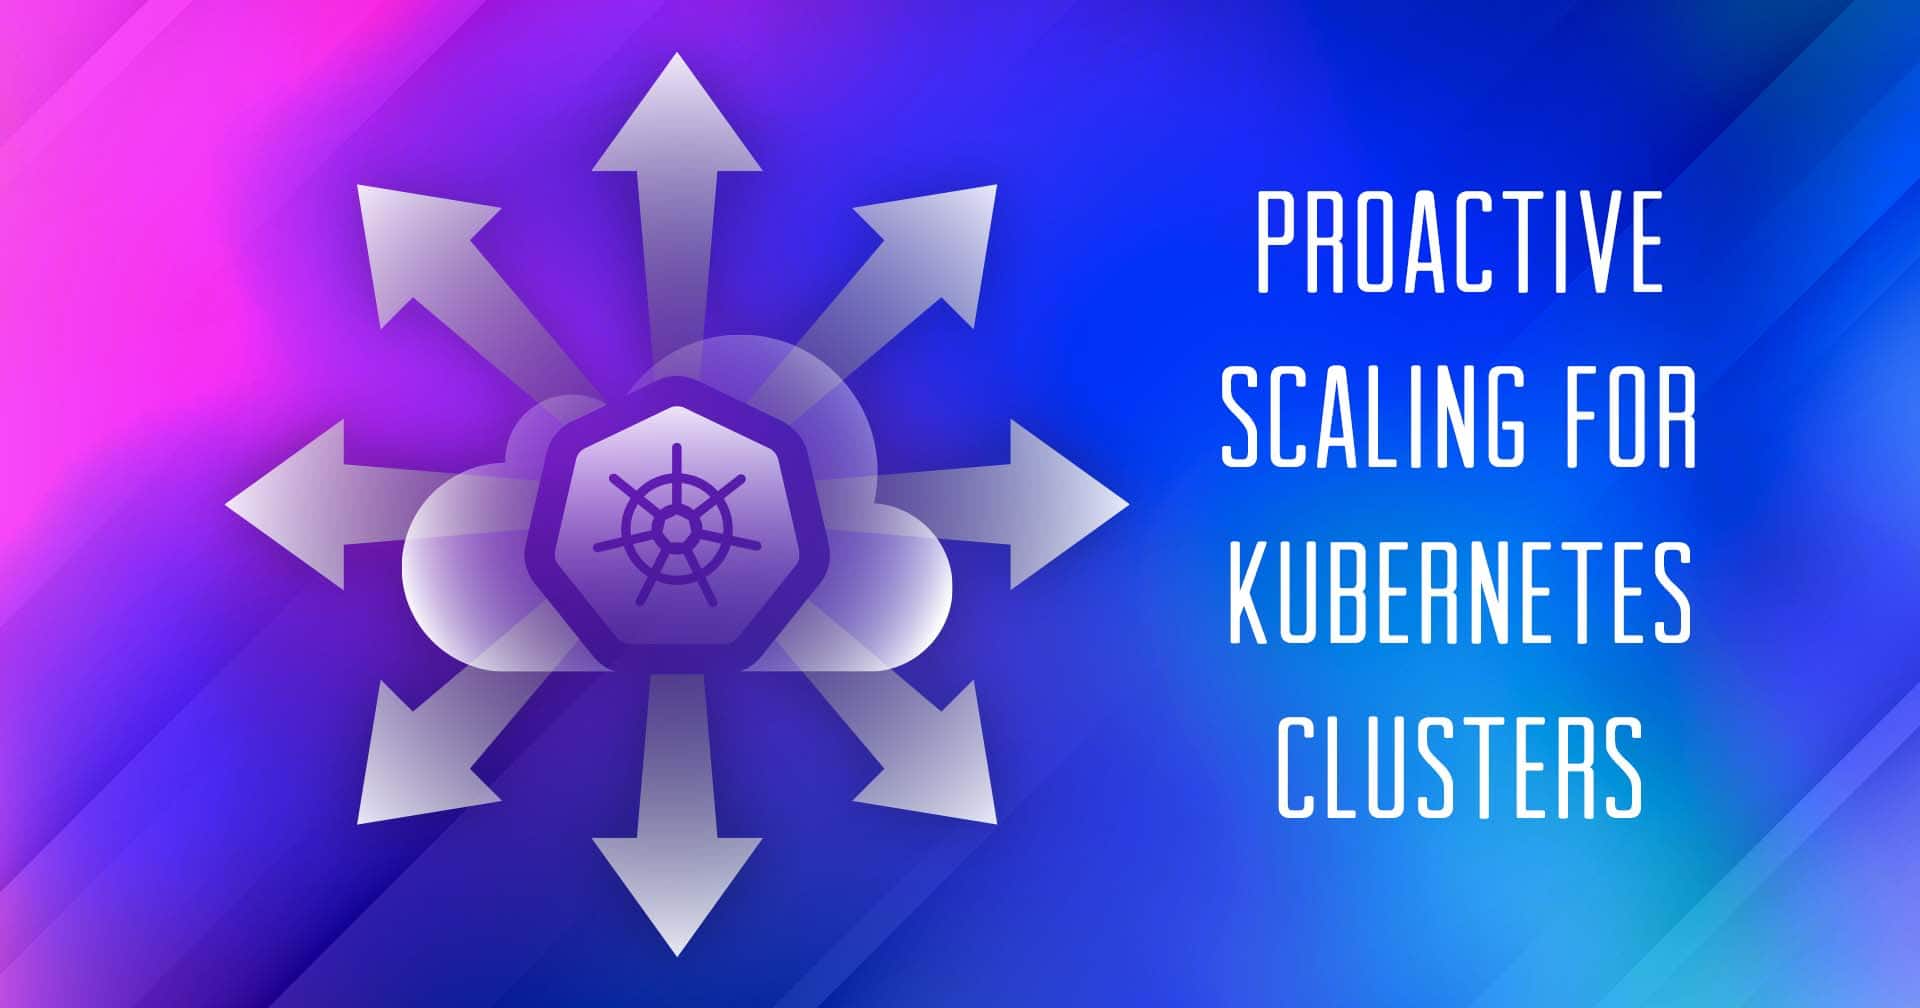 Proactive-Scaling-for-Kubernetes-Clusters (プロアクティブ・スケーリング・フォー・クバーネット・クラスター)